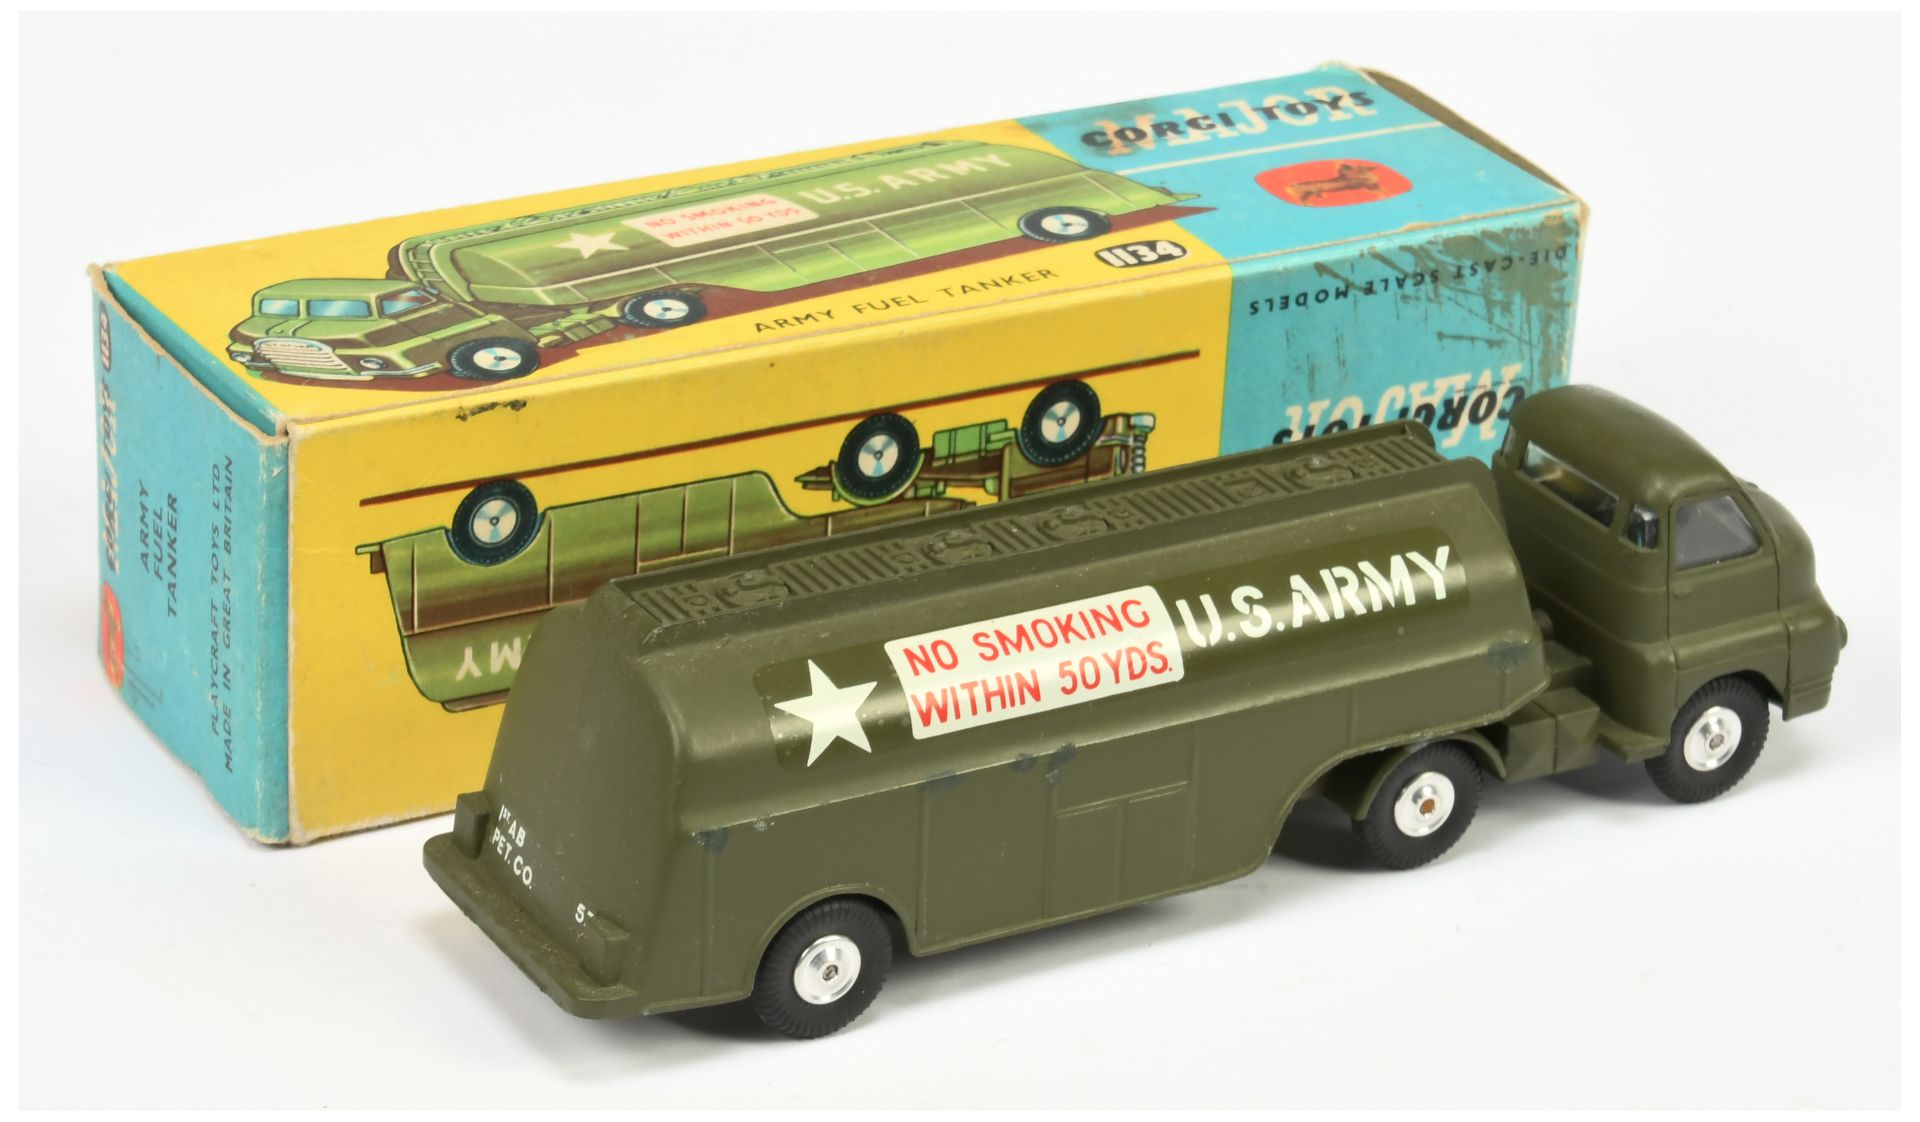 Corgi Toys 1134 Bedford Type S Articulated Military Tanker "US ARMY" - Drab Green Cab, tanker, fi... - Image 2 of 2